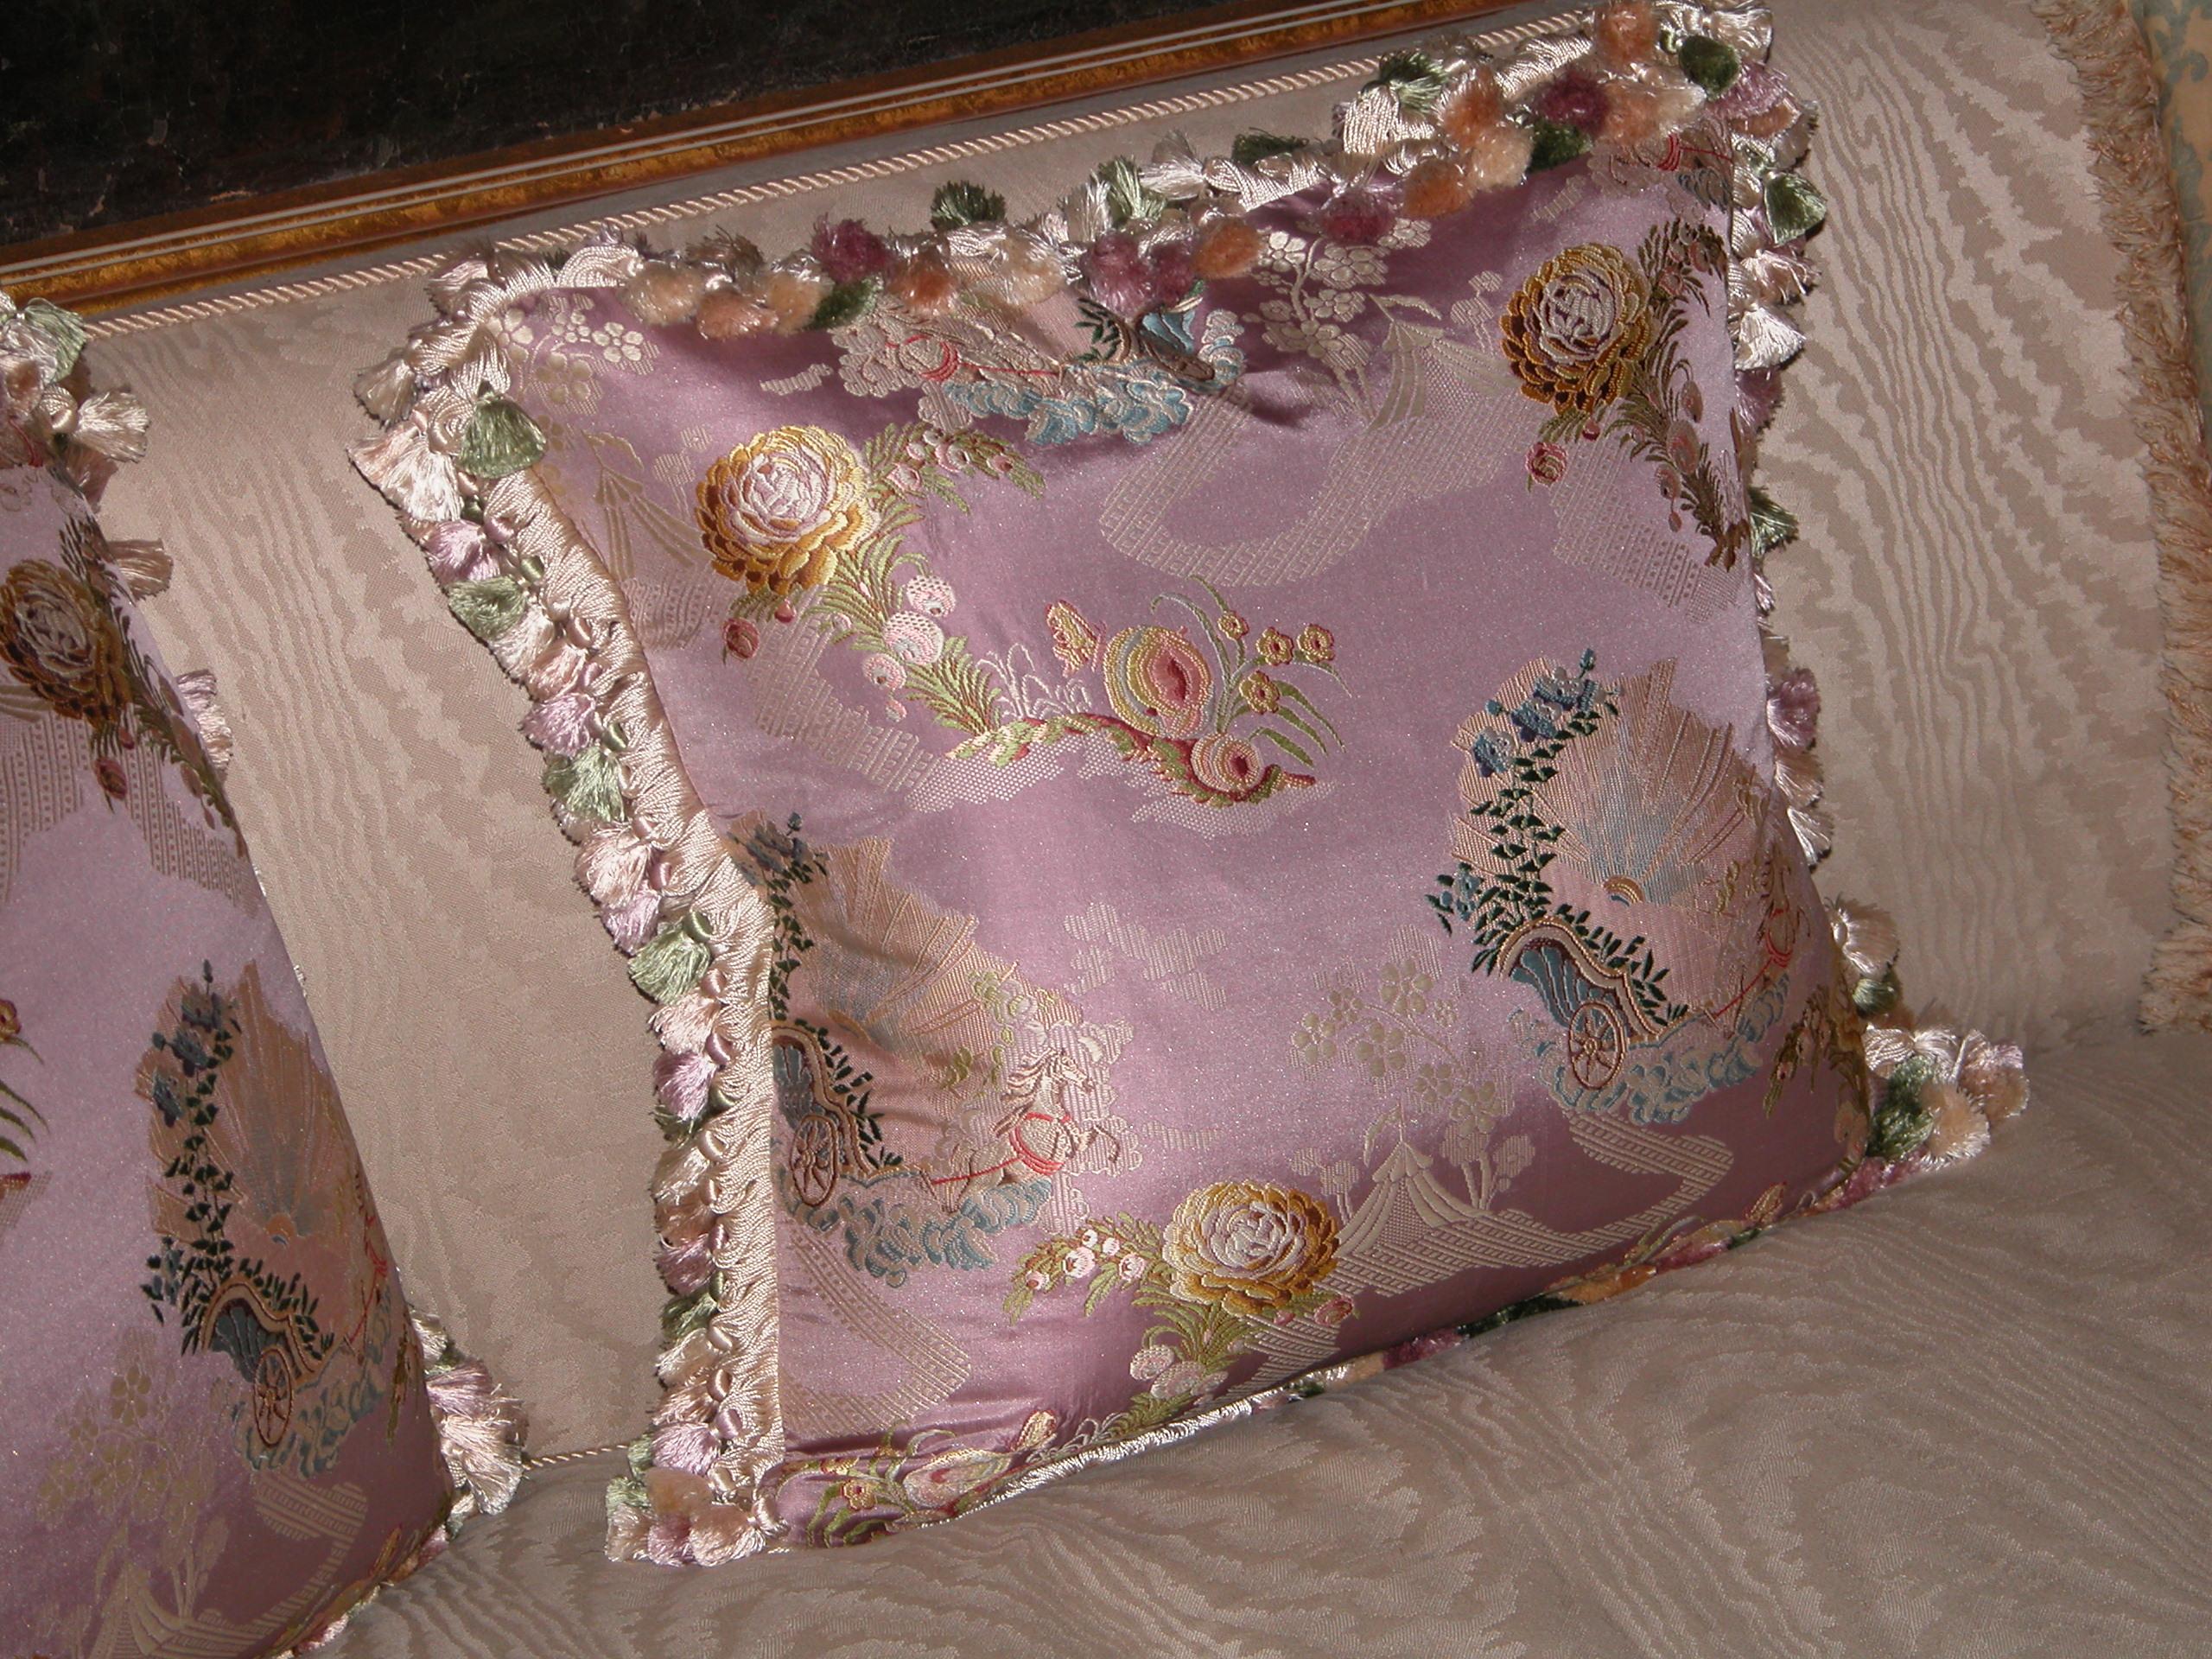 Contemporary Pillows Made of French Silk Brocade with Scalamandre Silk Tassel Trimming, Pair For Sale